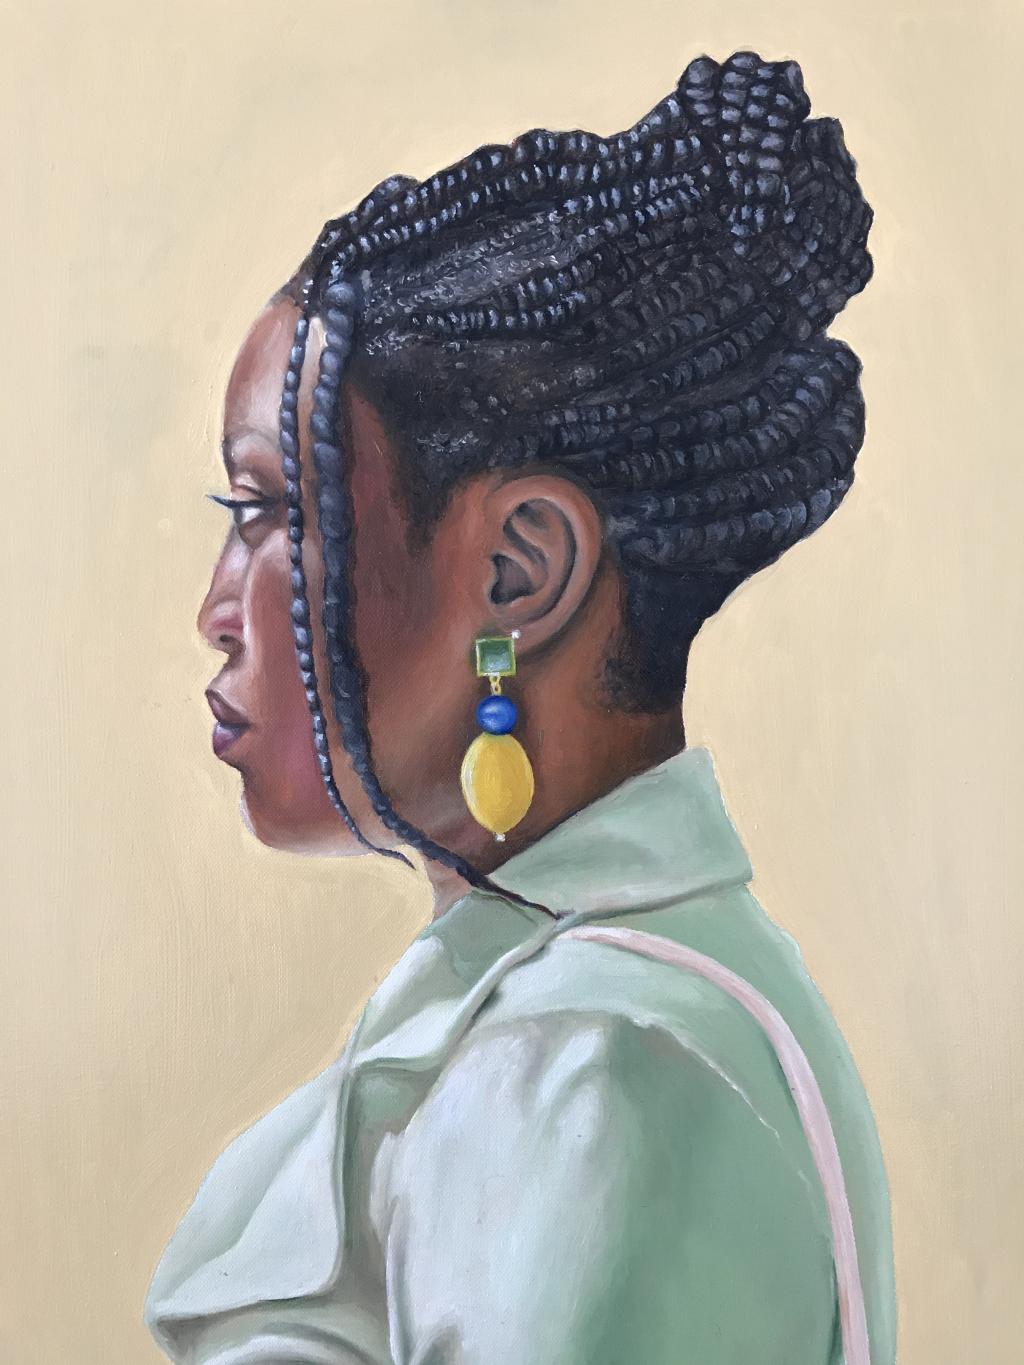 A painting by Kirk Maynard of a woman's profile.